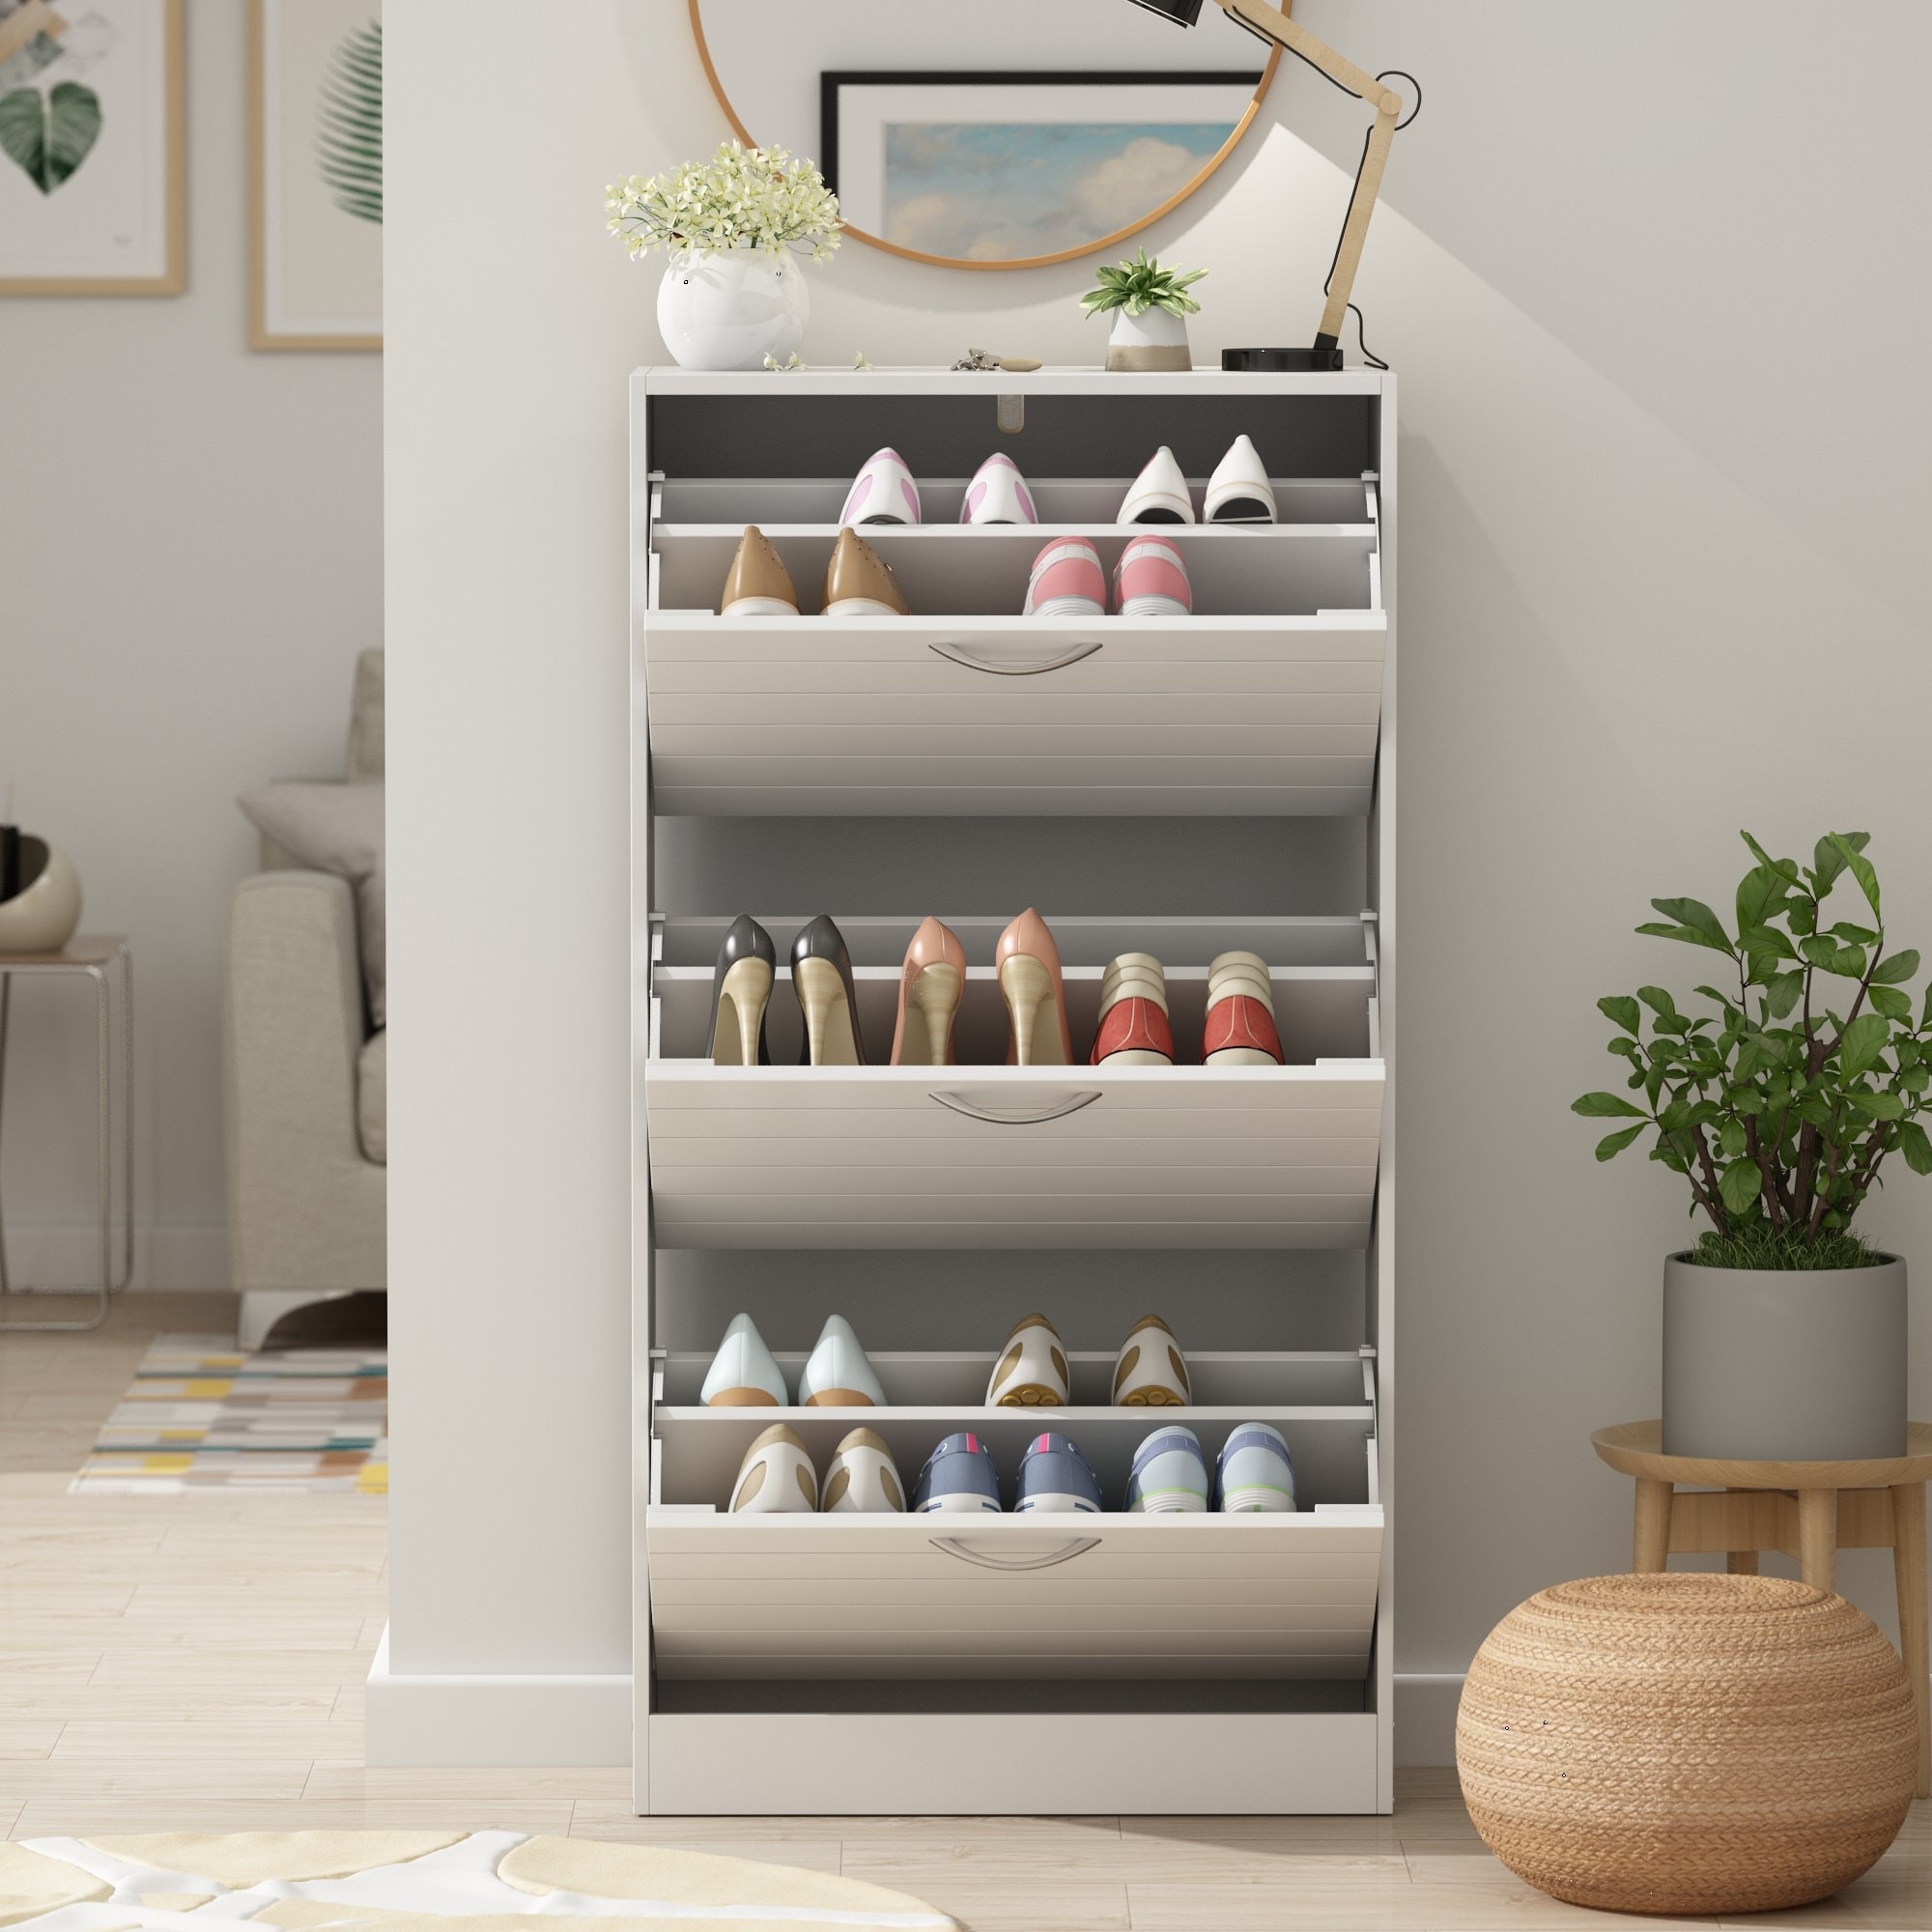 https://ak1.ostkcdn.com/images/products/is/images/direct/d005d8a57ce17477f52369995e4b968213b5fbf8/Shoe-Cabinet-with-Flip-Drawer-for-Entryway-Rack-Storage-Organizer.jpg